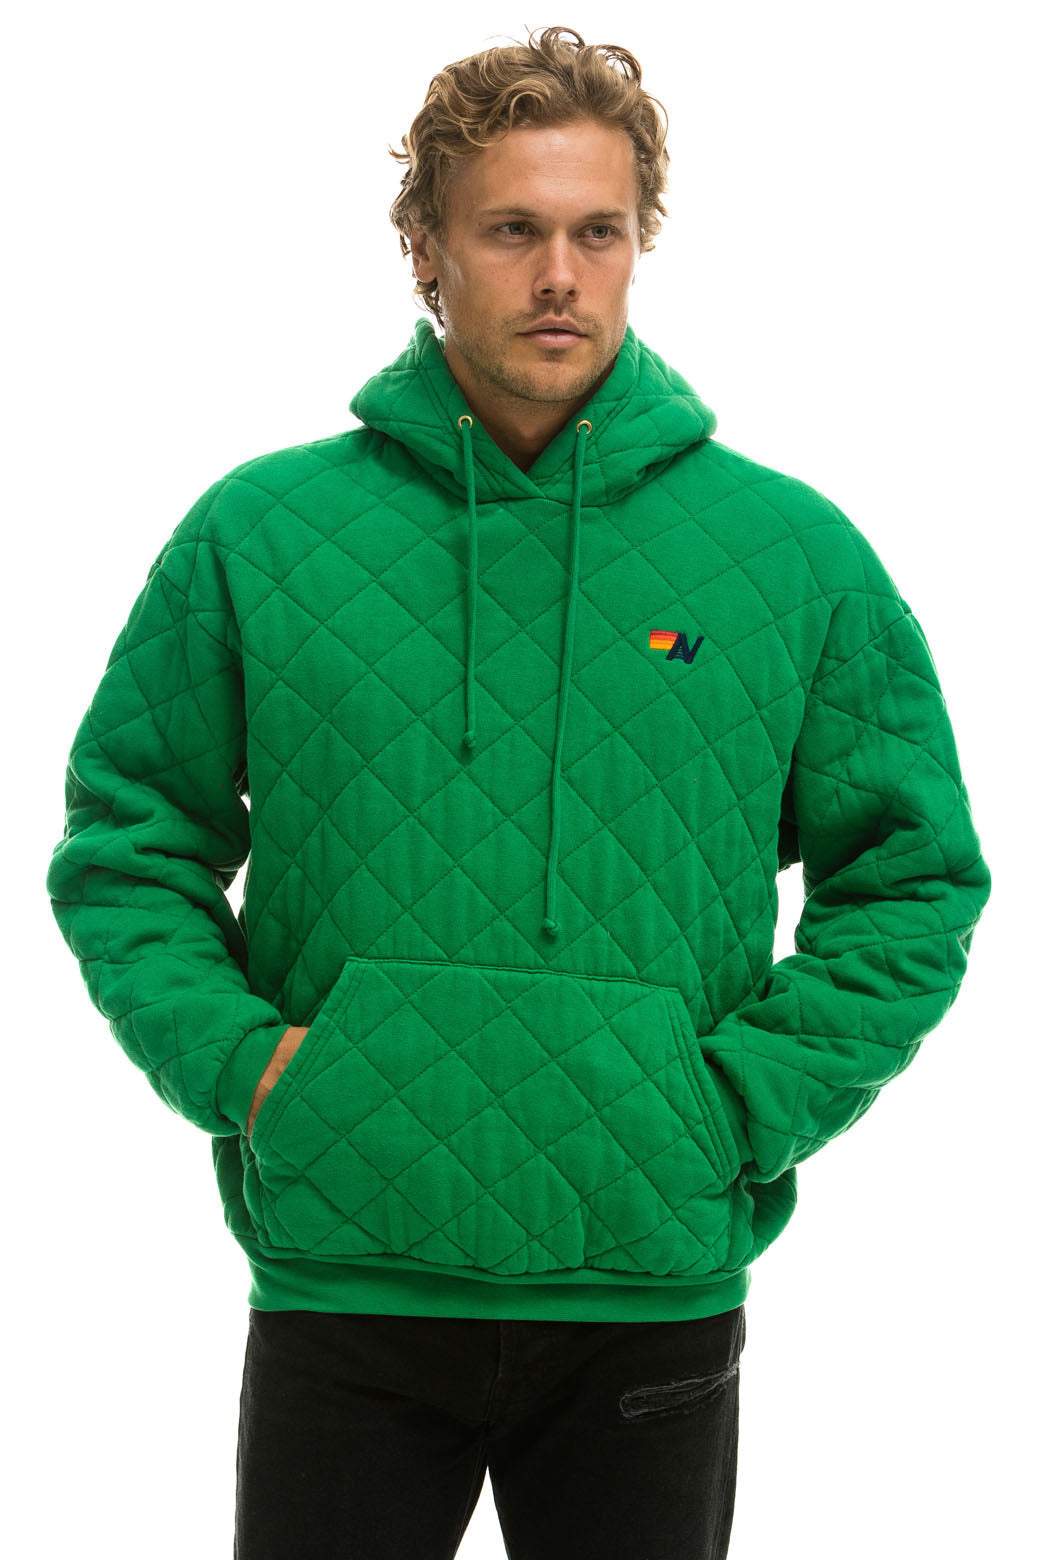 QUILTED RELAXED PULLOVER HOODIE - KELLY GREEN Hoodie Aviator Nation 